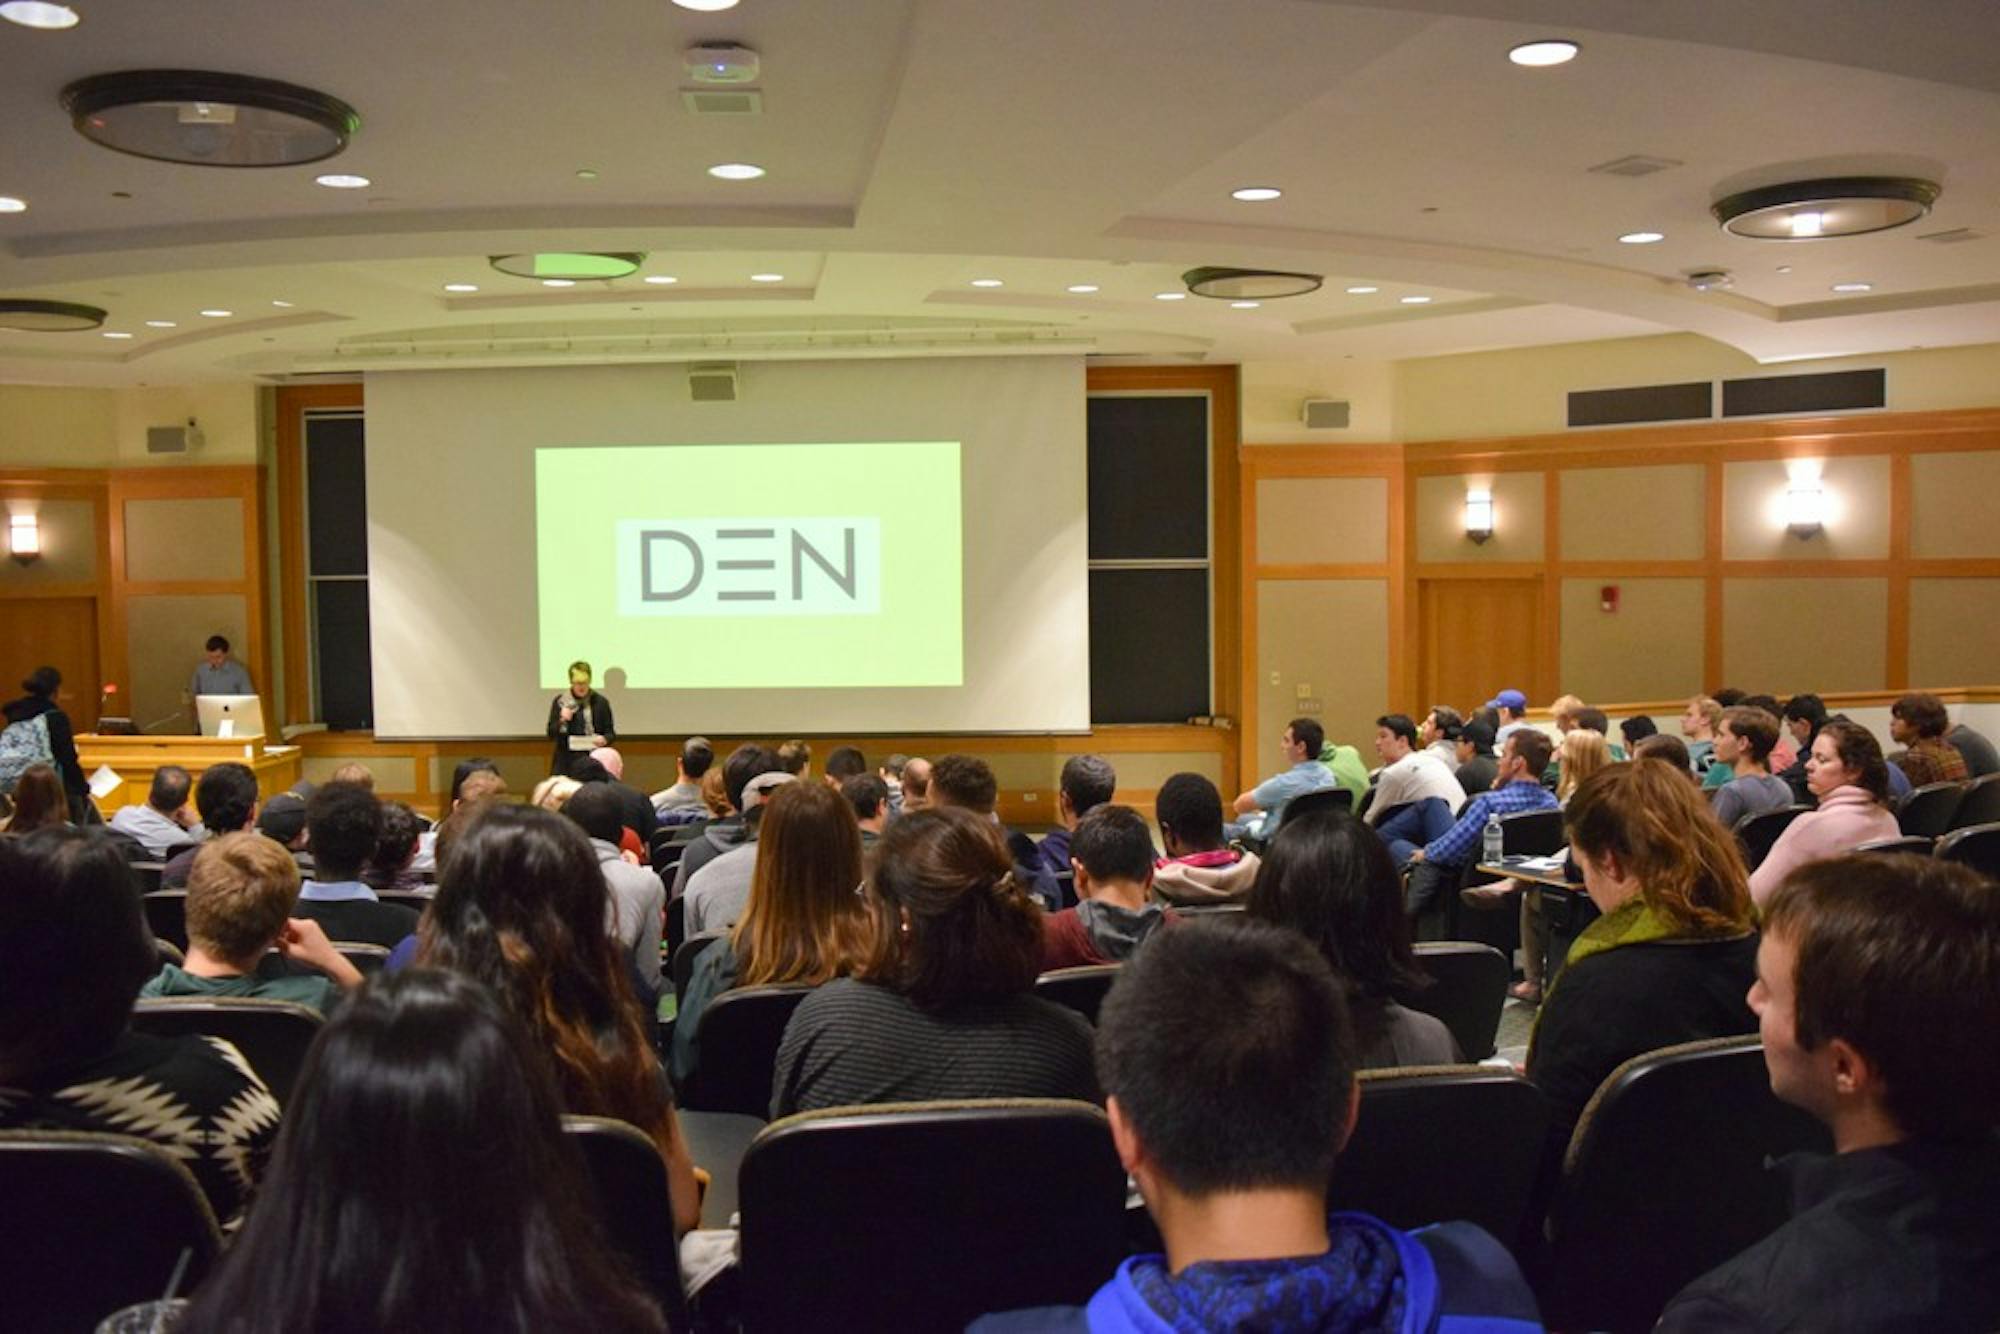 Students listened to a presentation about The Pitch, which is sponsored by DEN and DALI Lab.